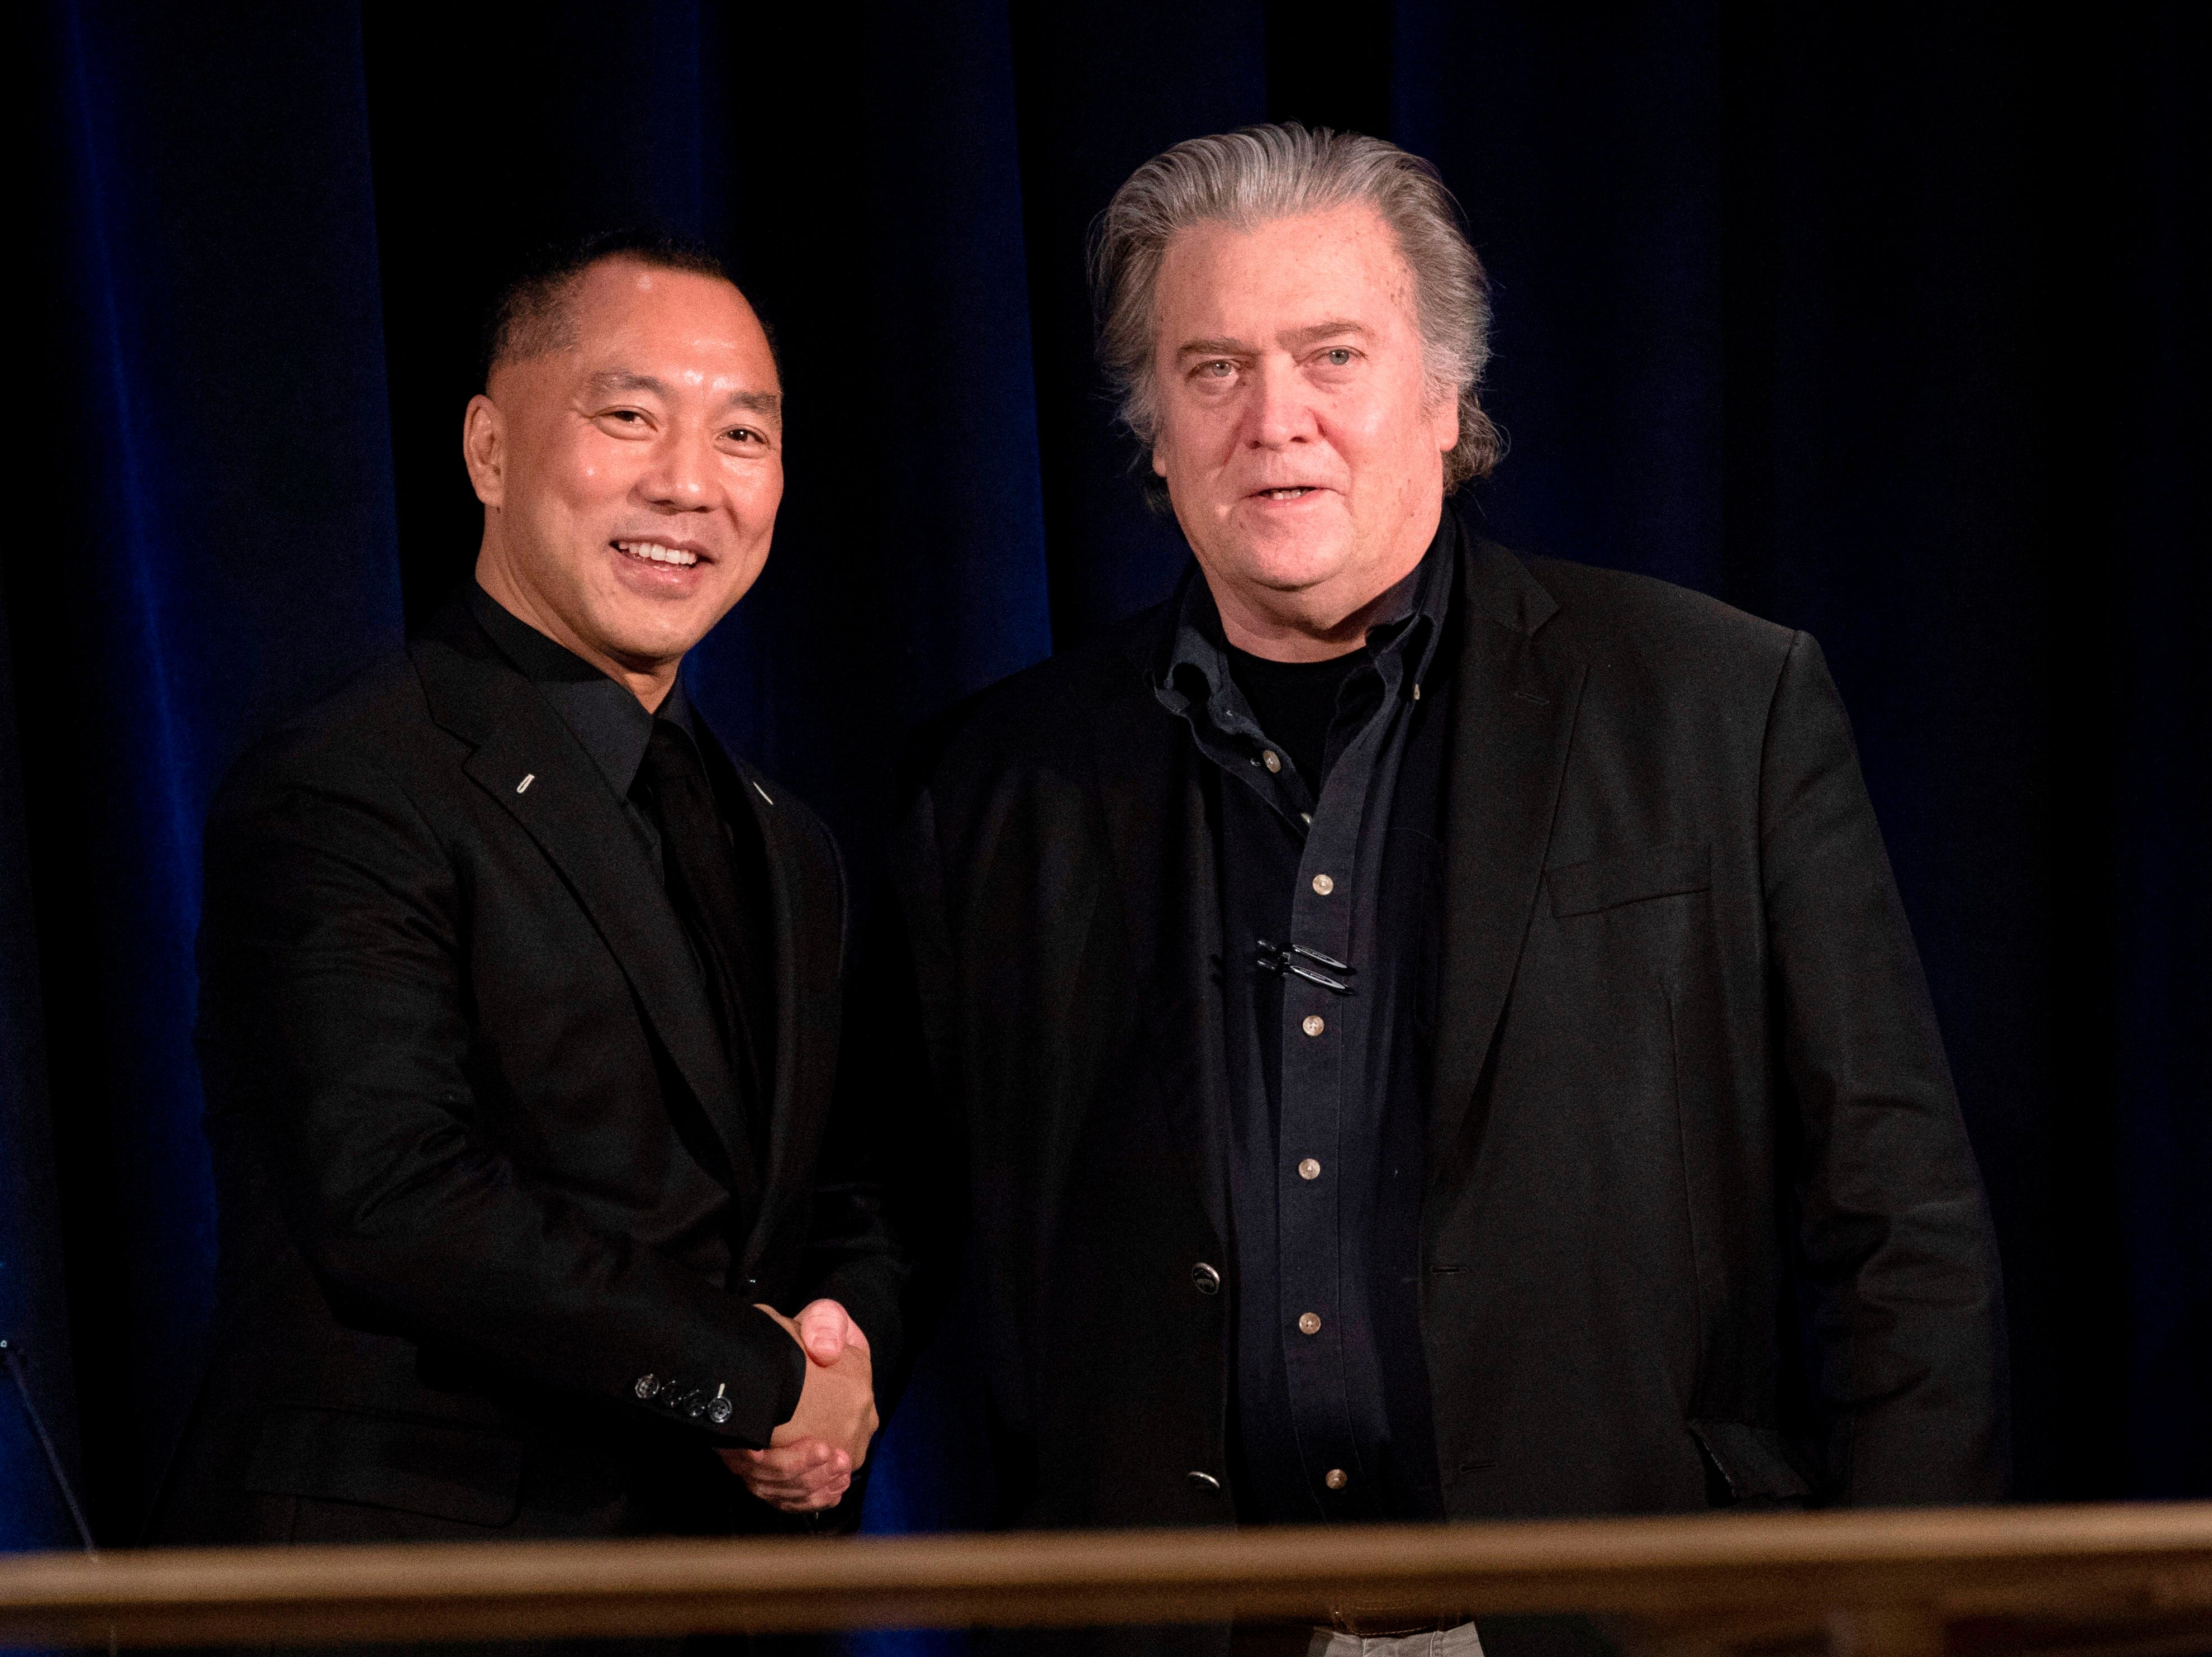 Former White House Chief Strategist Steve Bannon (R) greets fugitive Chinese billionaire Guo Wengui before introducing him at a news conference on November 20, 2018 in New York